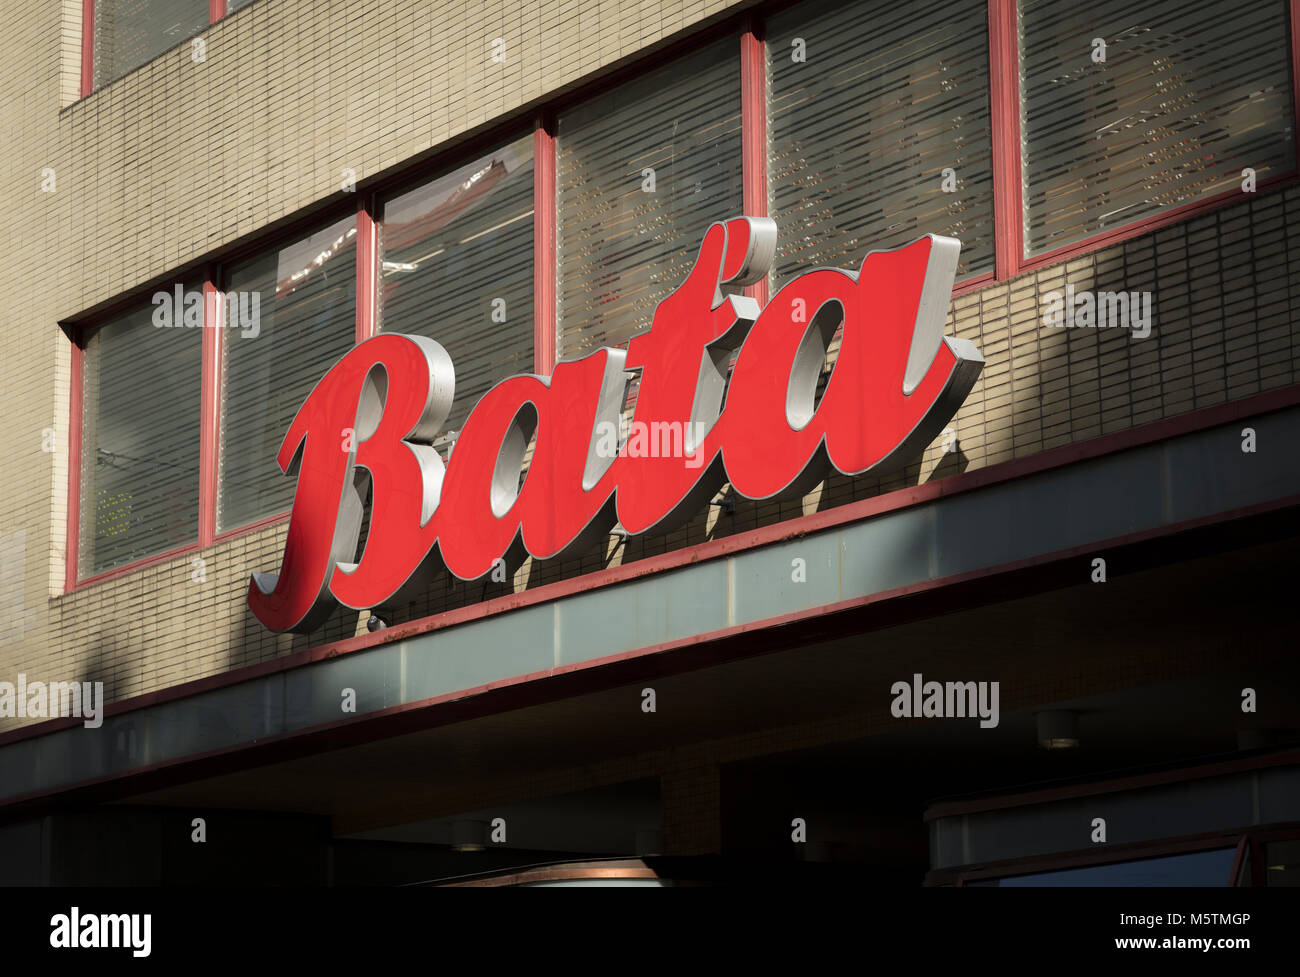 BATA signage on a Store in Brno, Czech Republic, 24th February 2018 Stock Photo